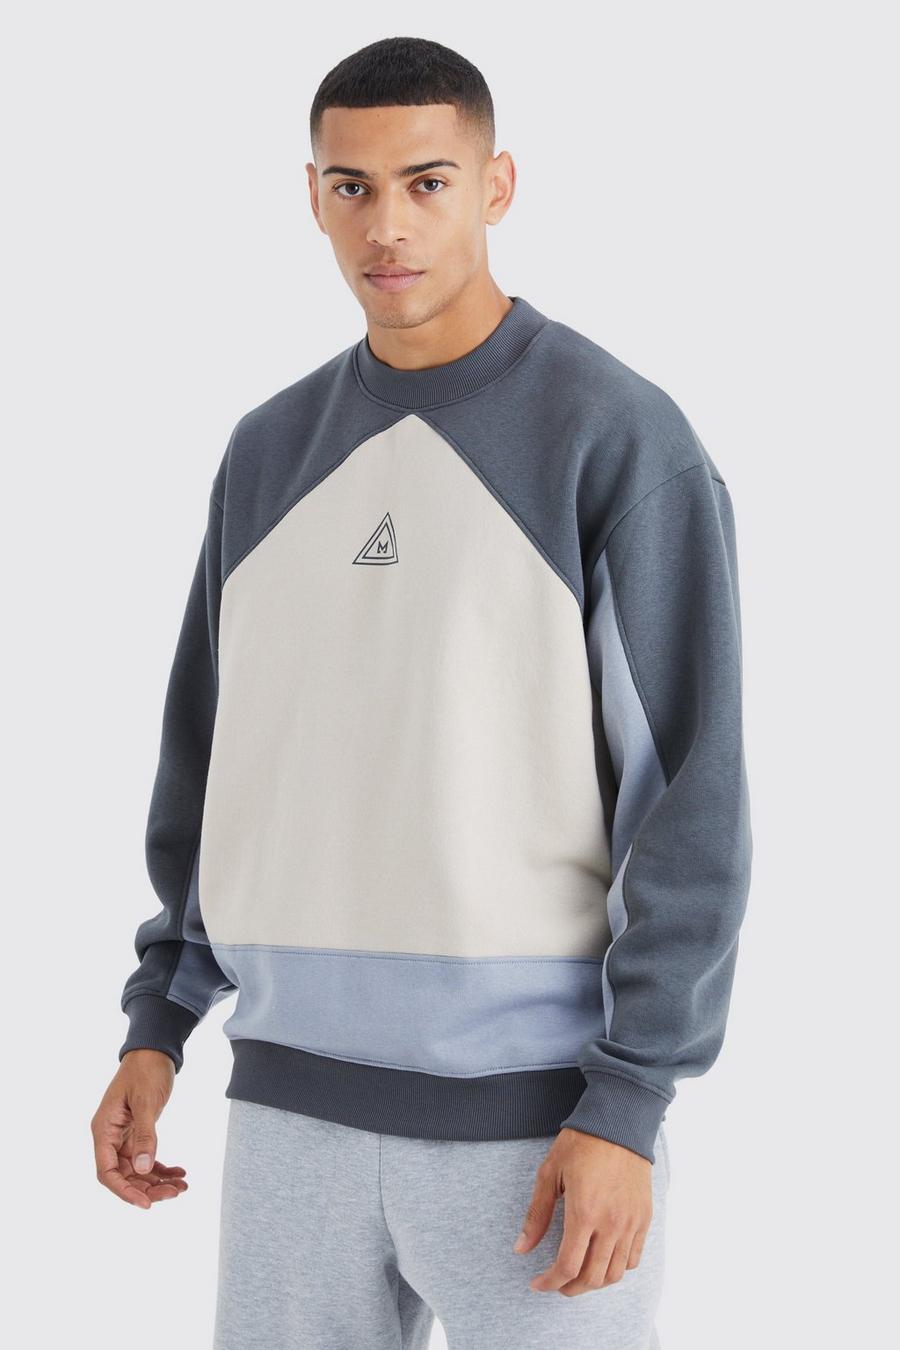 Charcoal grey Oversized Extended Neck Branded Colour Block Sweatshirt